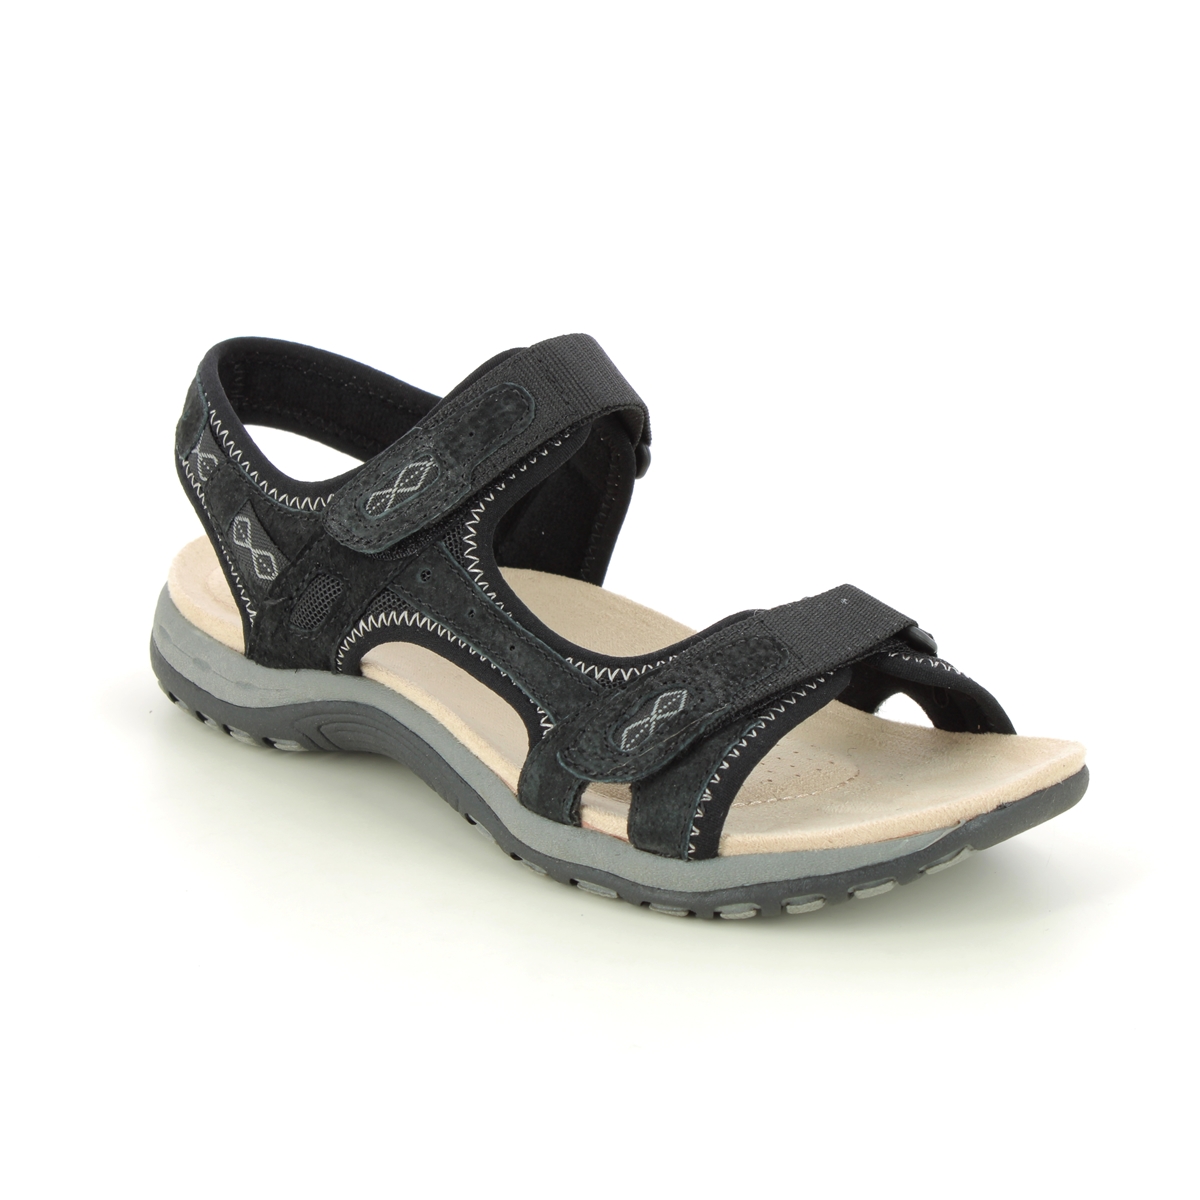 Earth Spirit Frisco Black Suede Womens Walking Sandals 40535-33 in a Plain Leather and Textile in Size 4